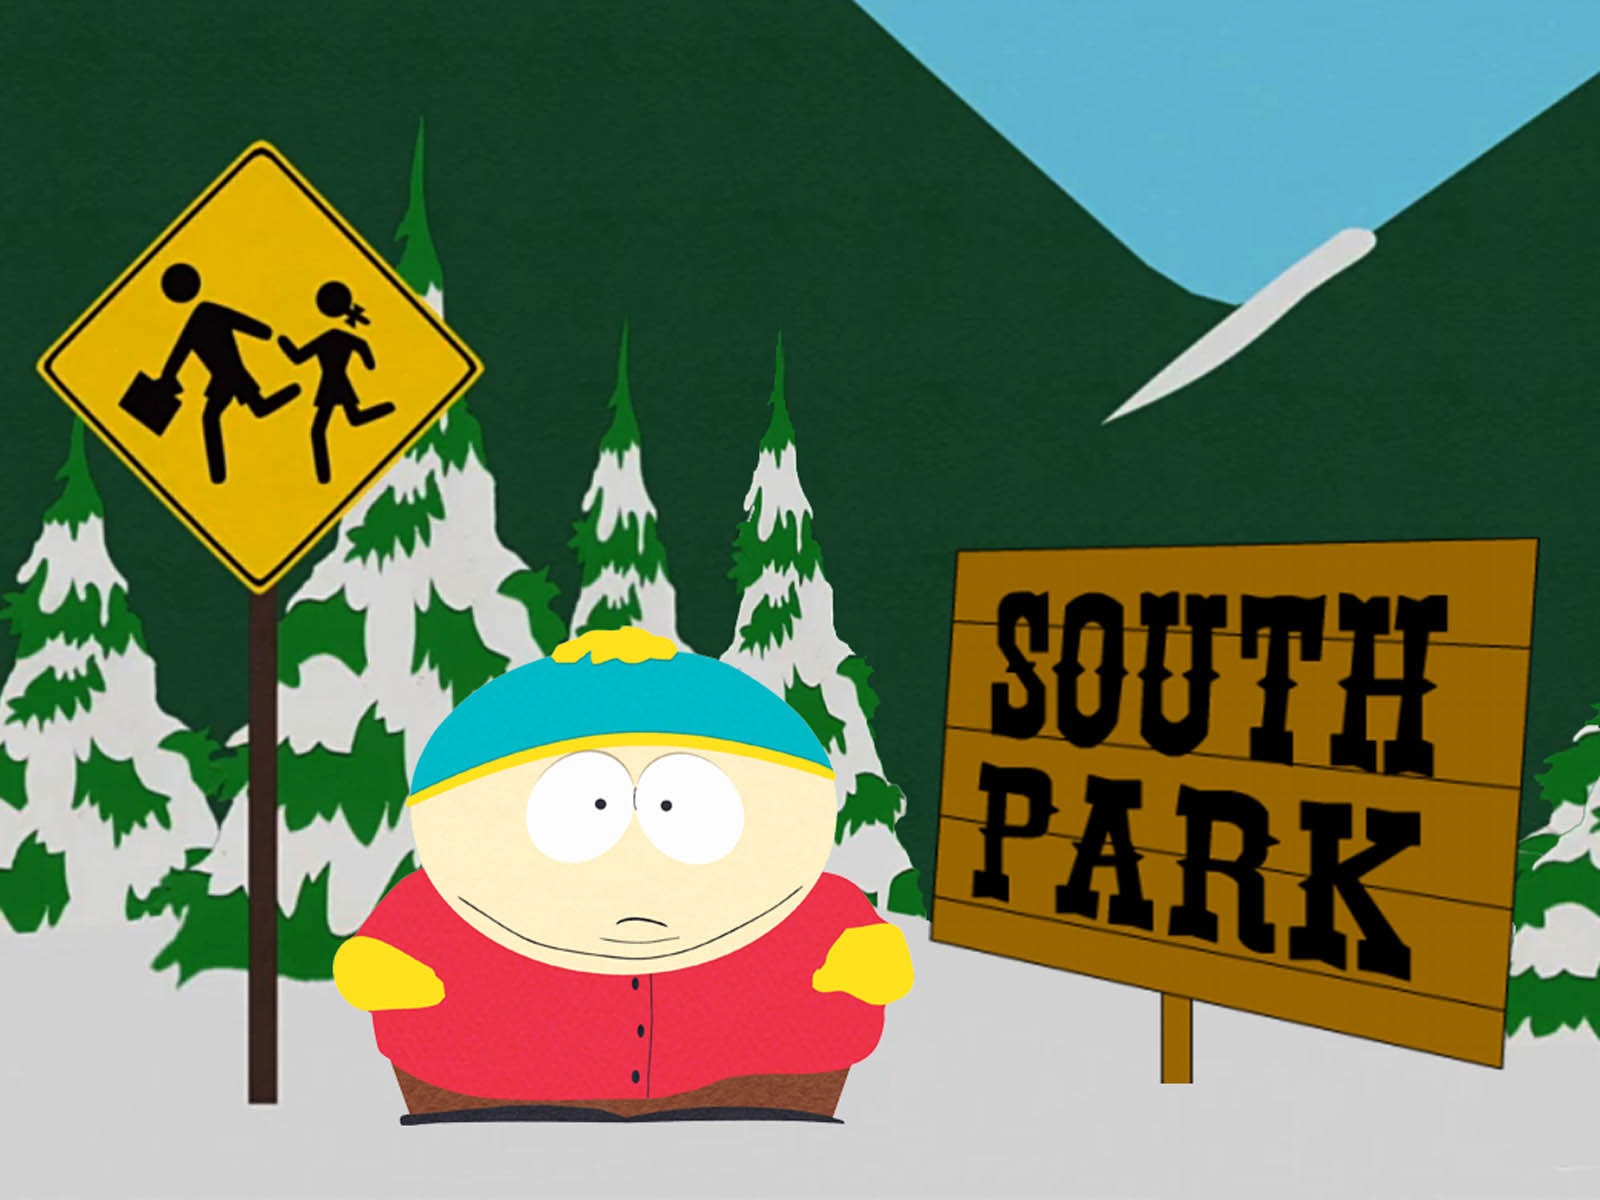 Eric Cartman Images HD Wallpapers – Daily Backgrounds in HD